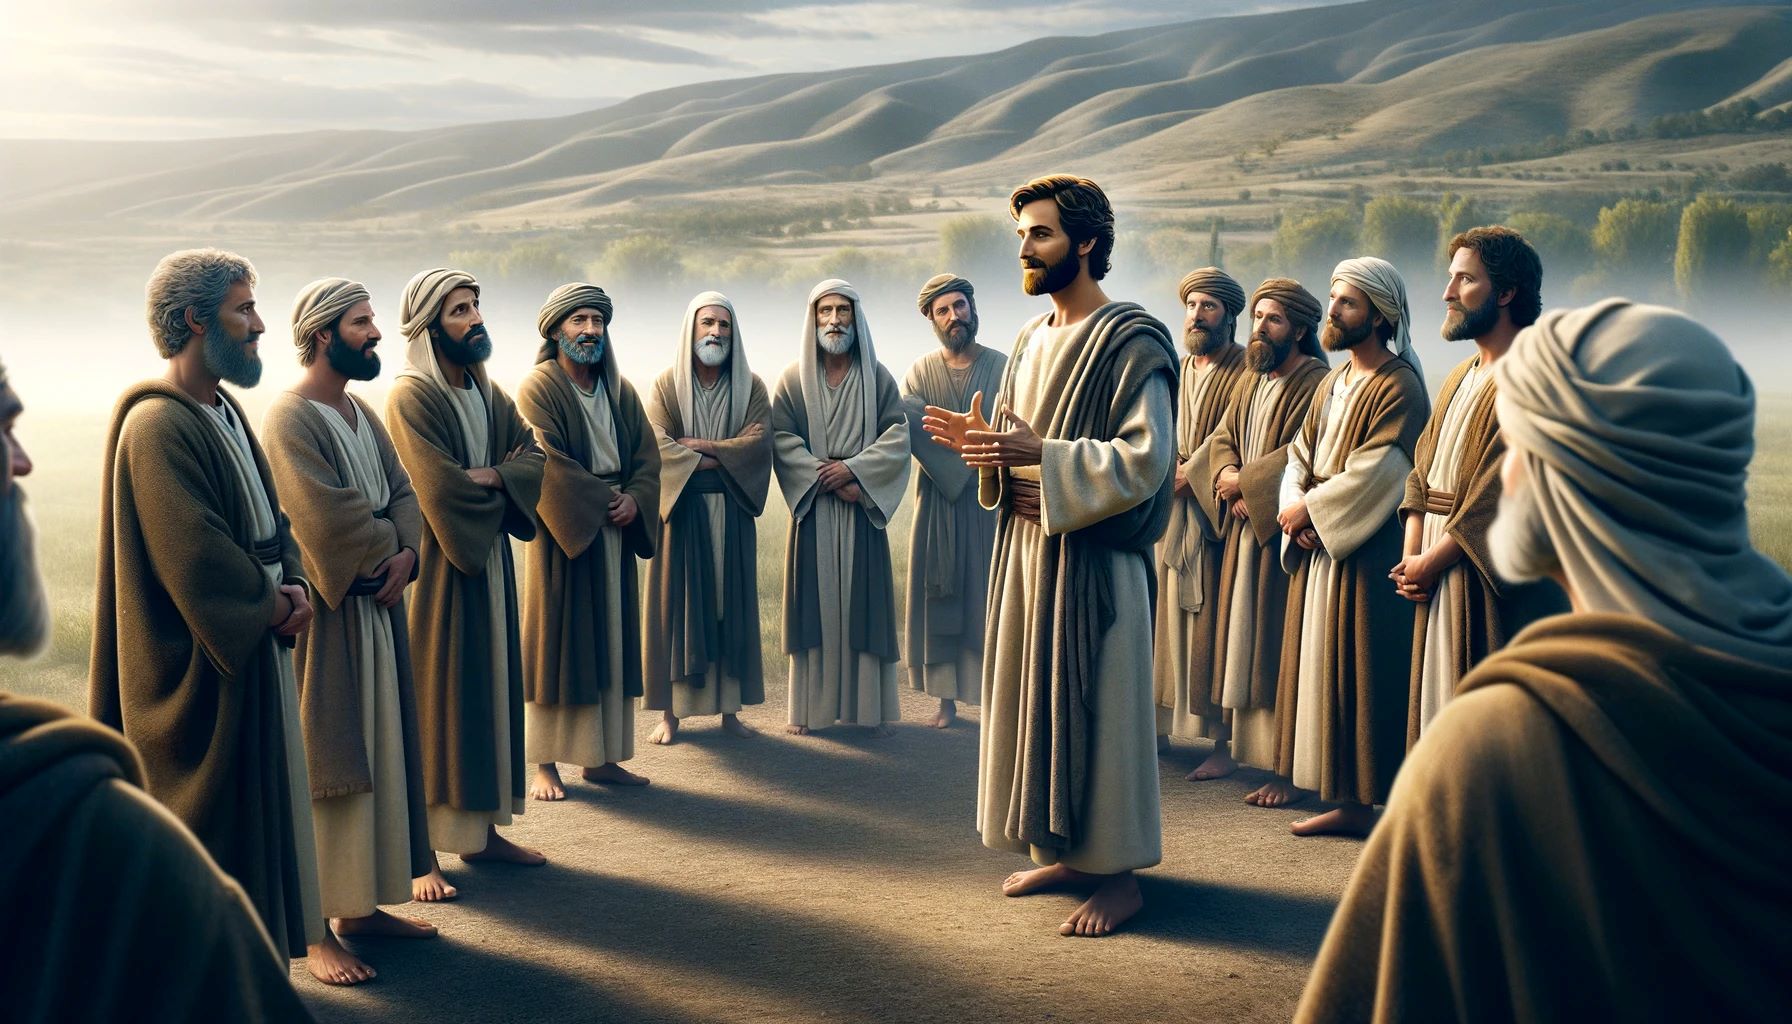 Who Is The Leader Of The 12 Apostles